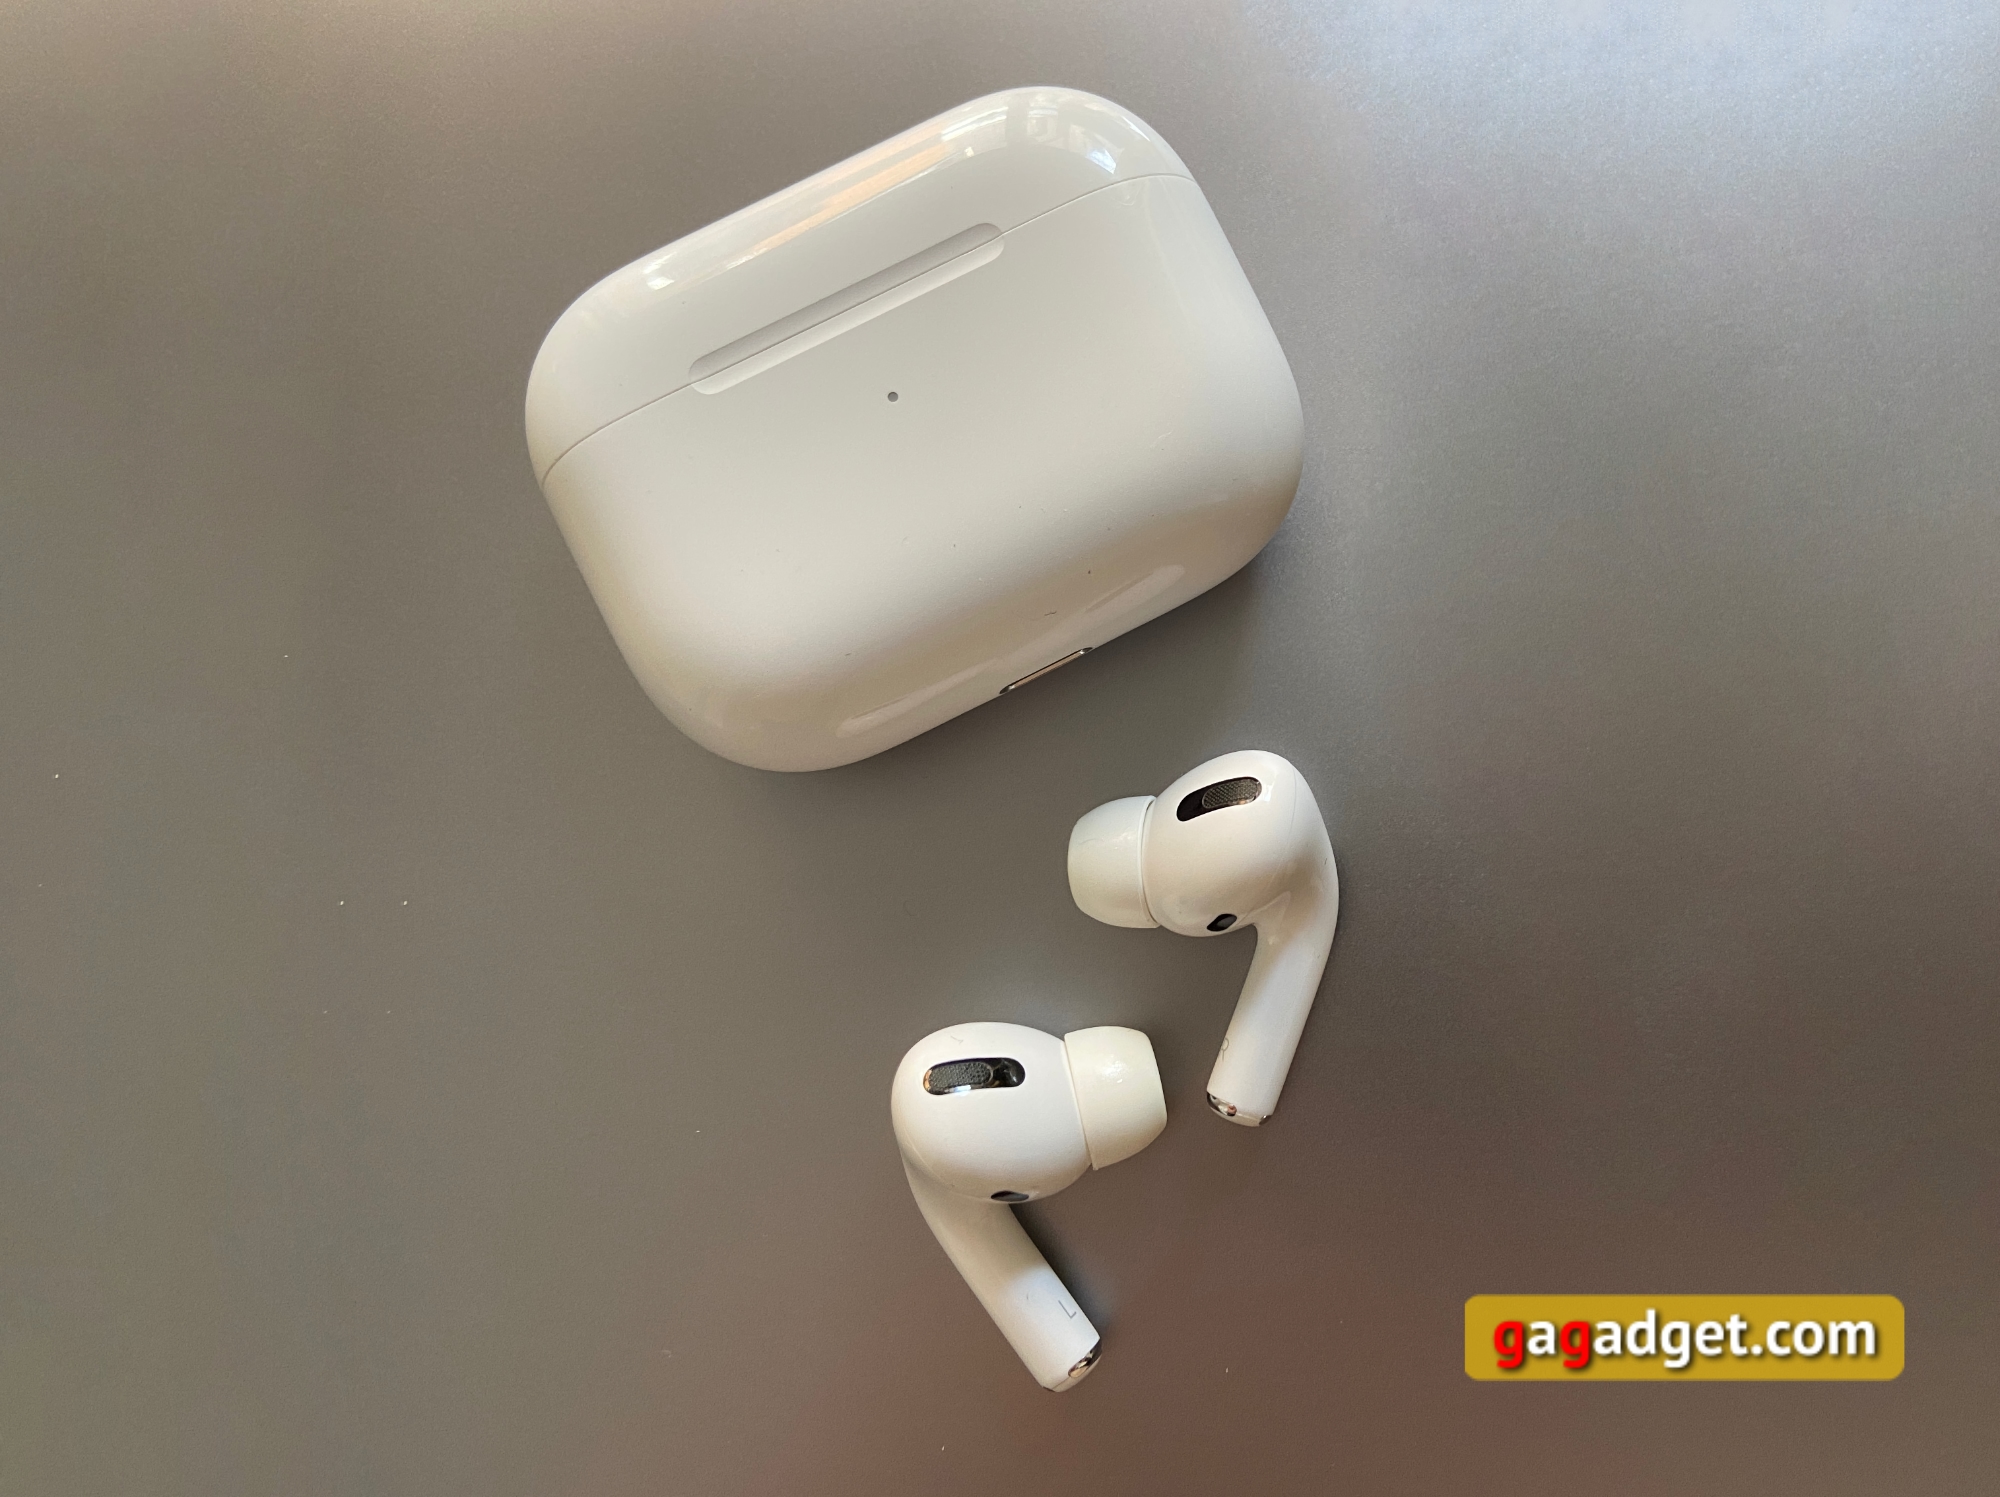 AirPods Pro updated to include Conversation Boost: What it is and how to enable it